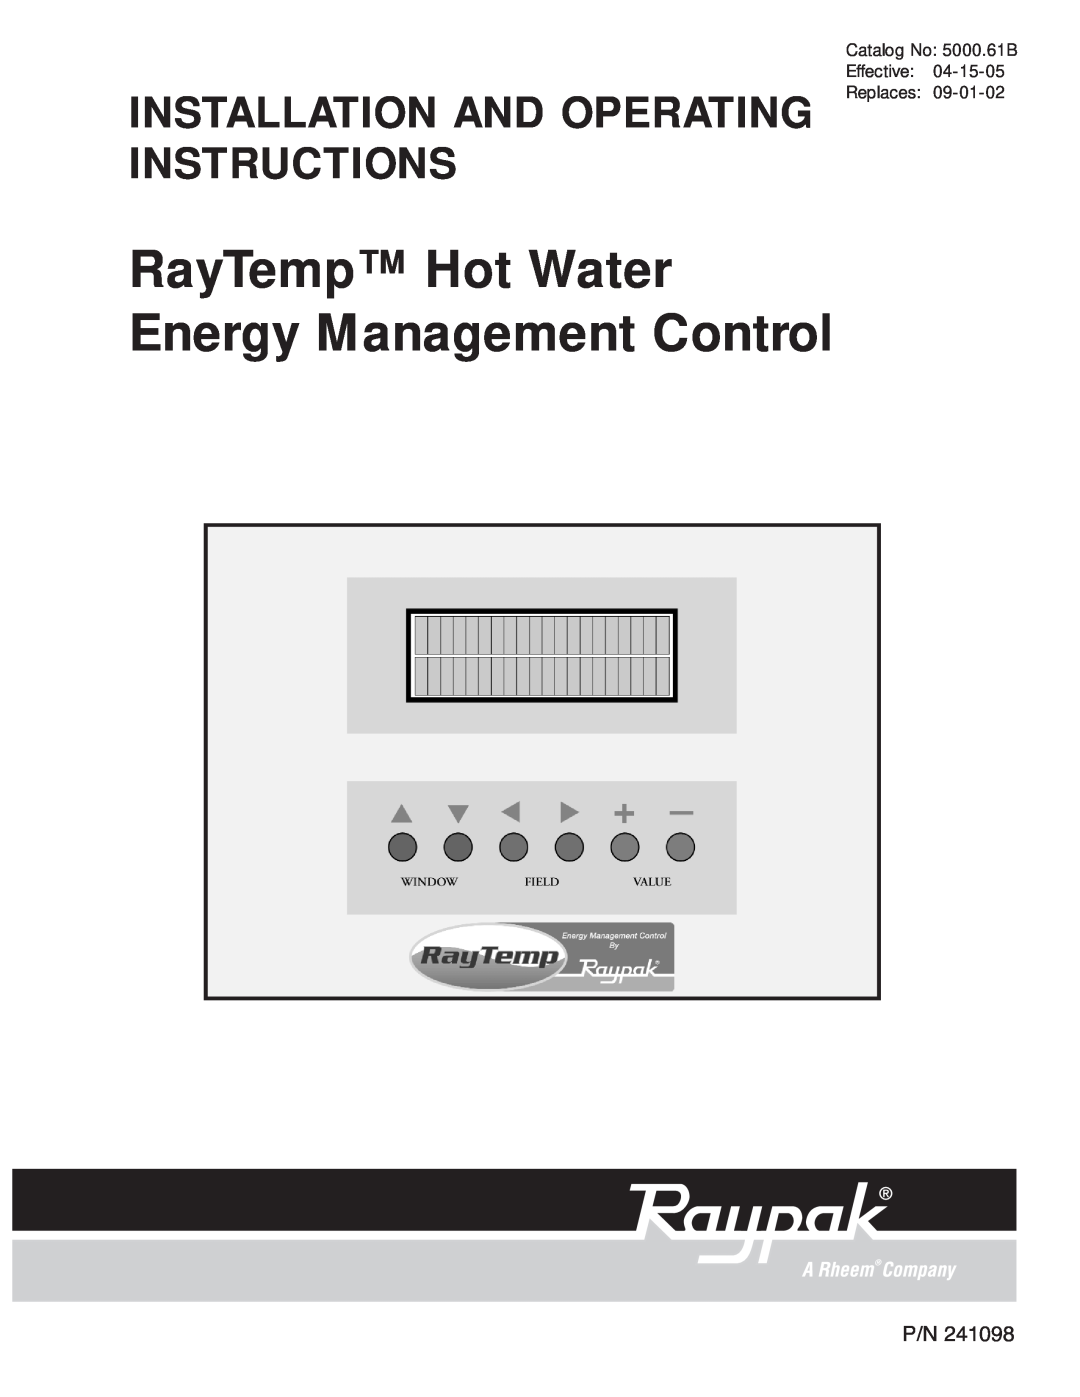 Raypak manual RayTemp Hot Water Energy Management Control, Installation And Operating Instructions 